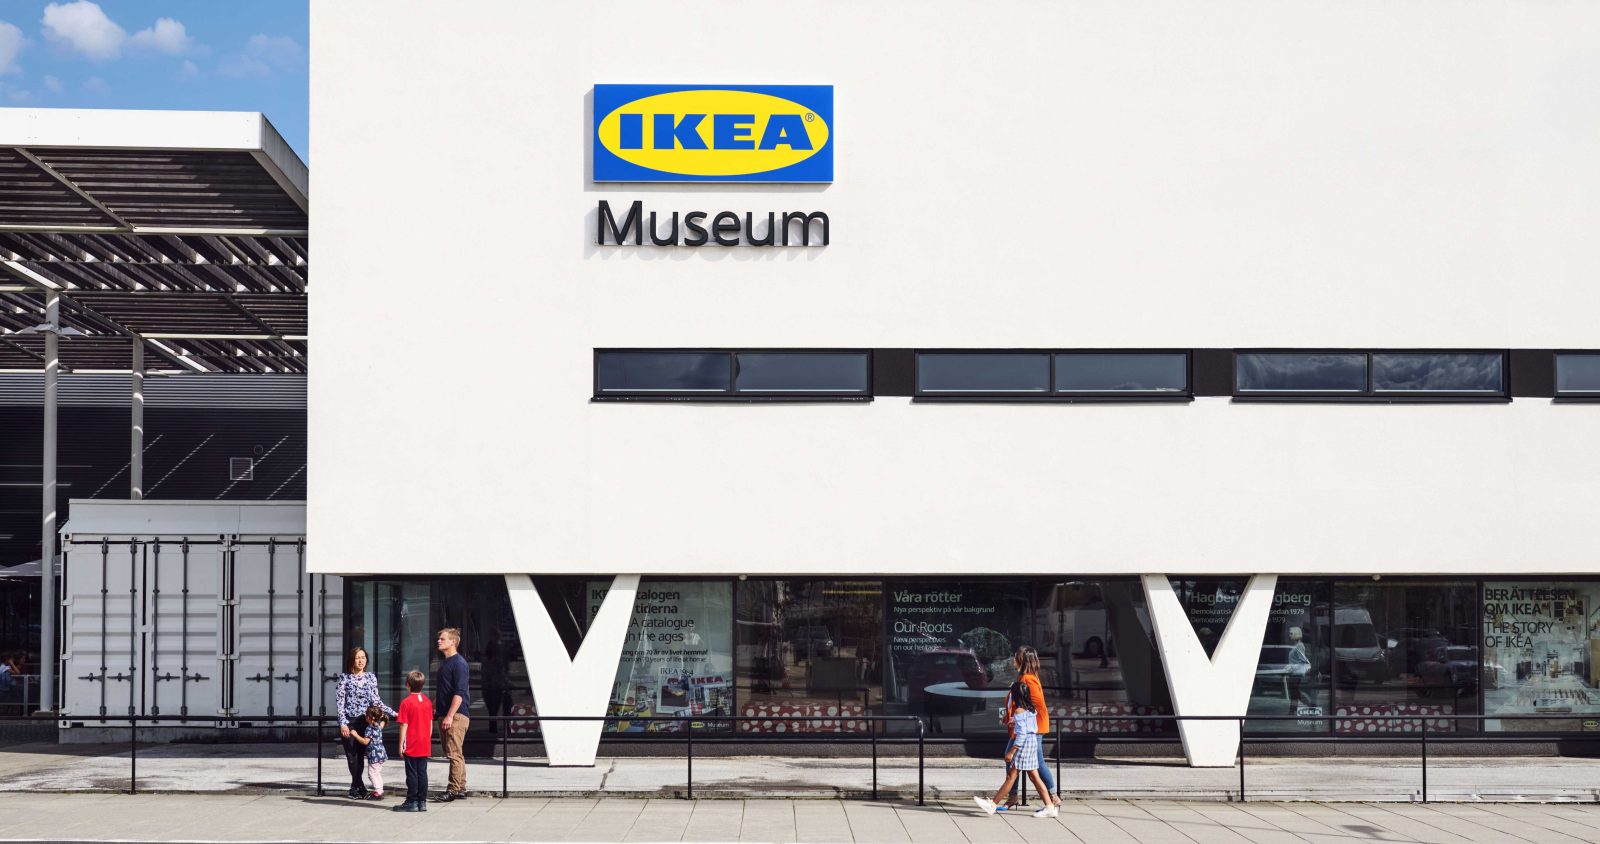 Find out about the museum - IKEA Museum